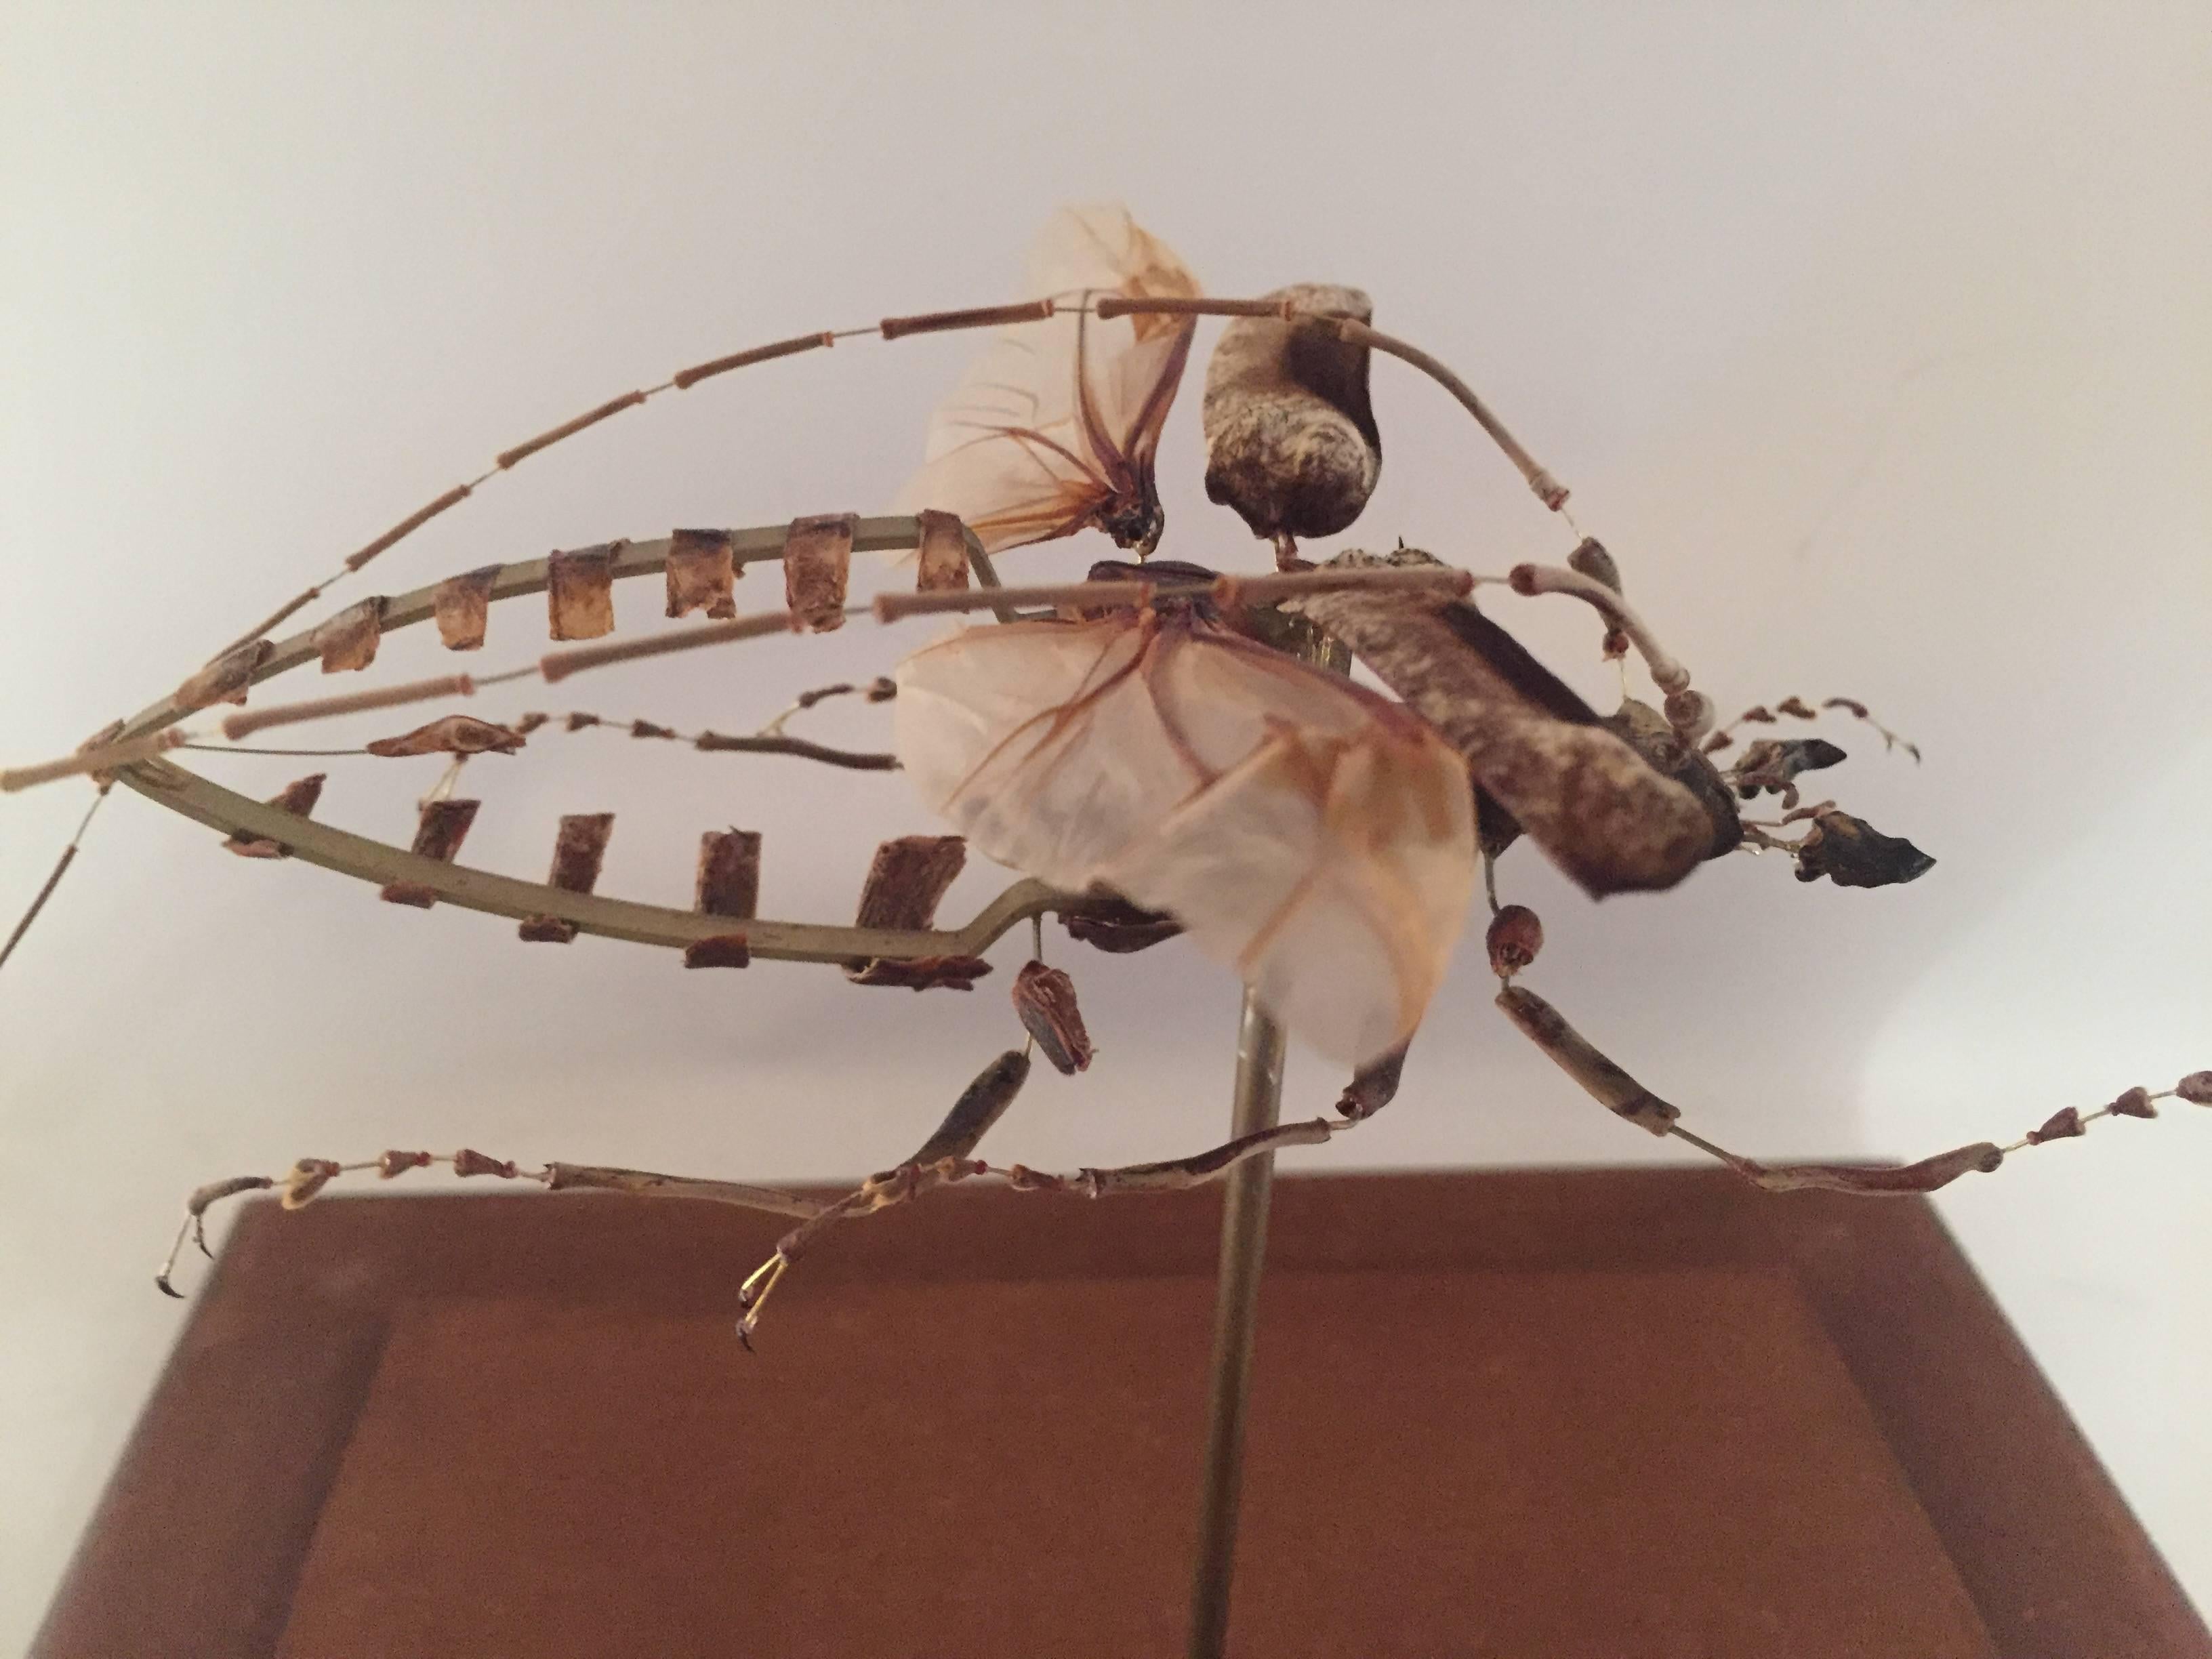 Organic Modern Deconstructed and Mounted Giant African Longhorn Beetle under Glass